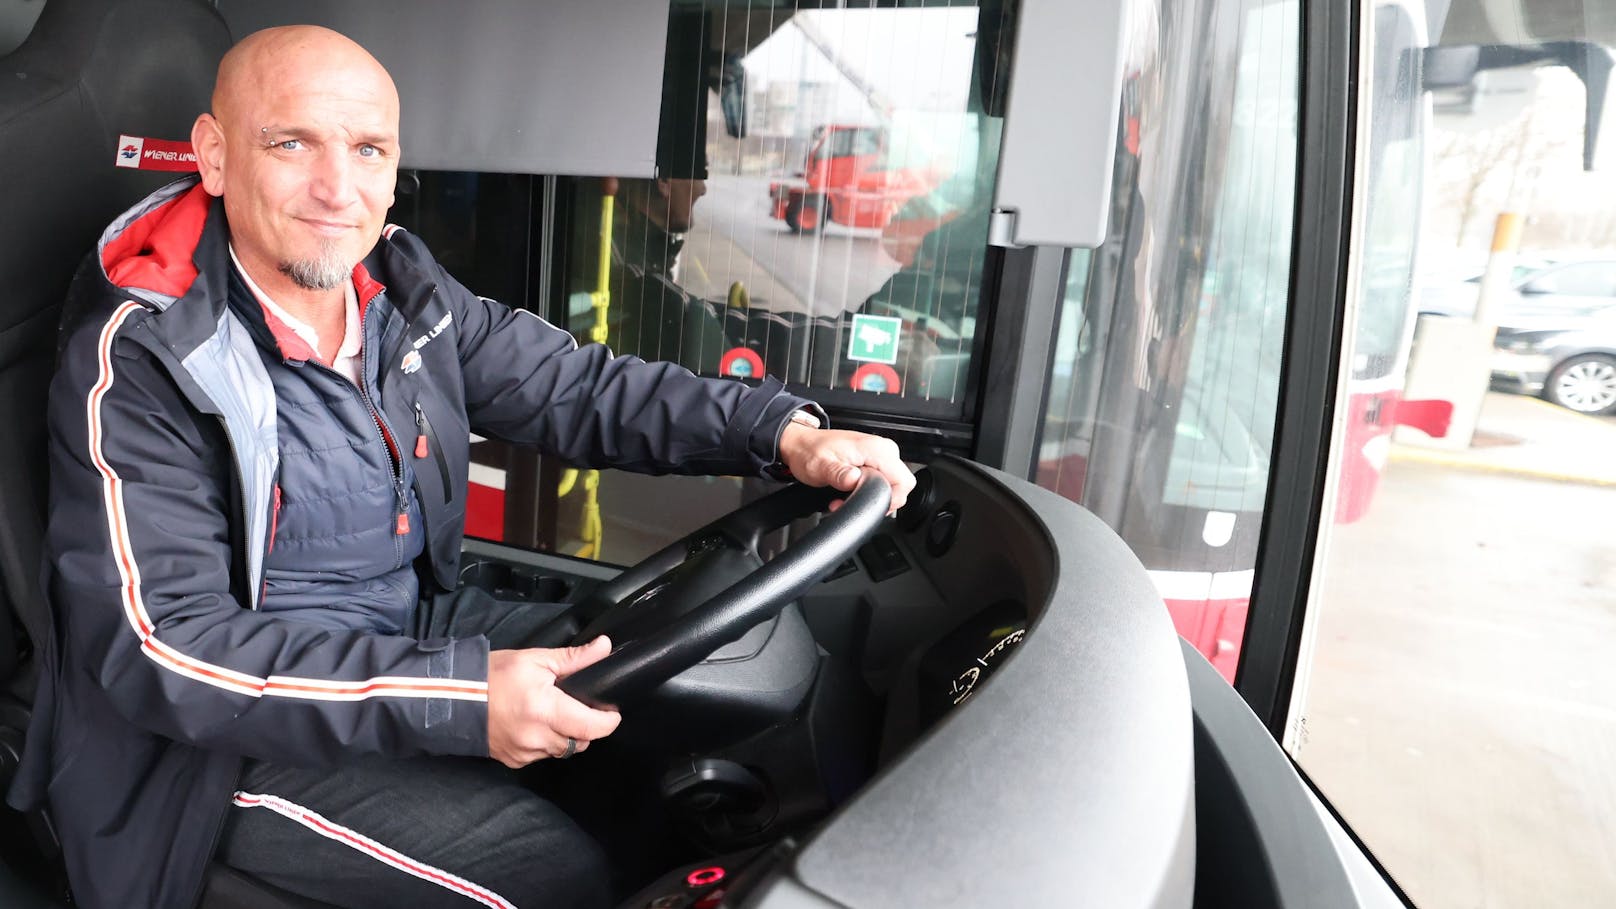 Nachtbusfahrer: Bei Bachelor-Party ging’s rund im Bus!